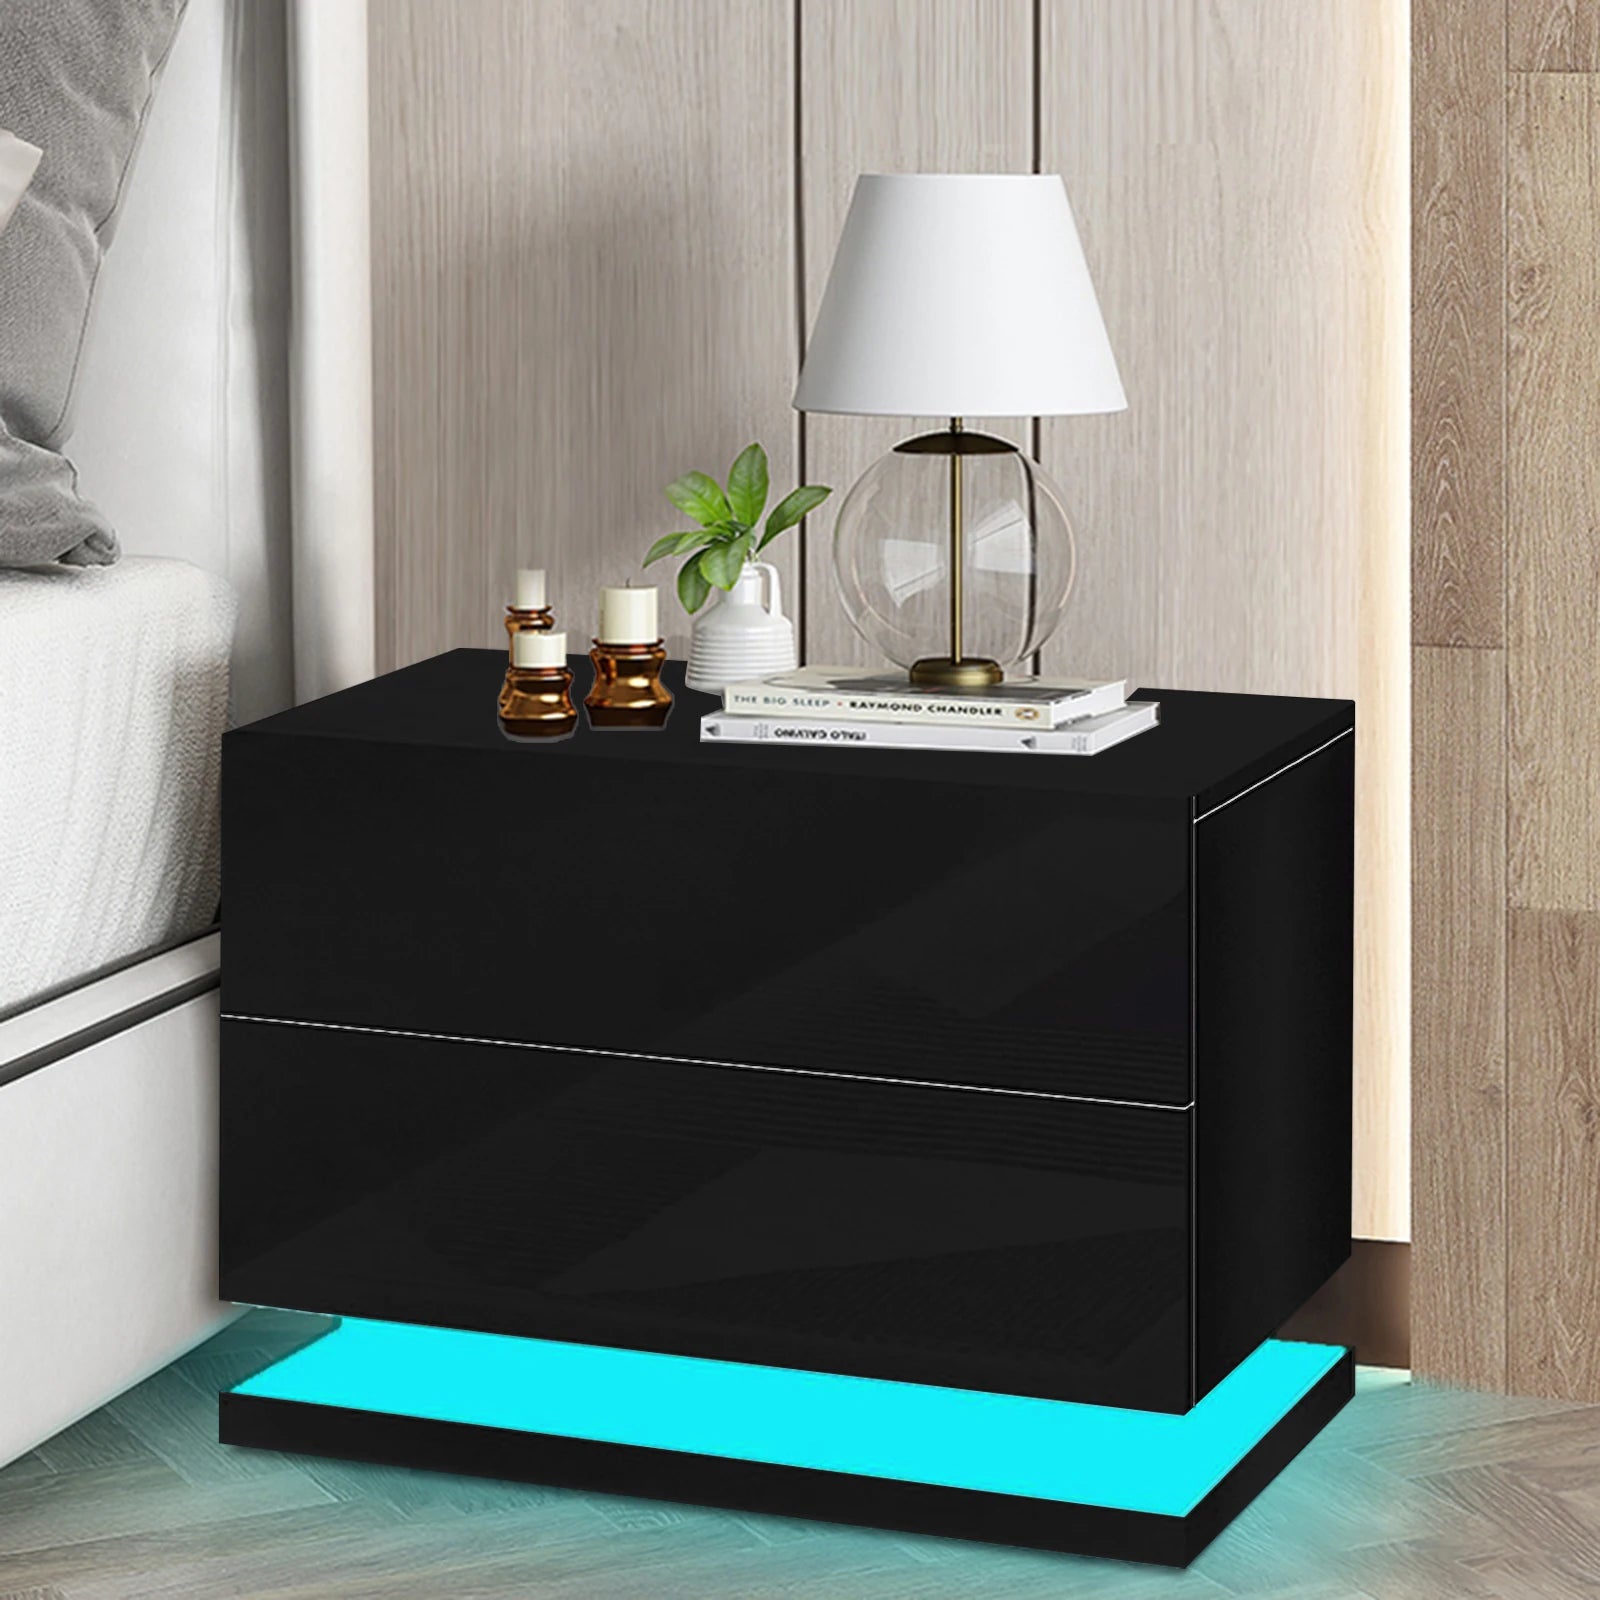 Bedroom Bedside End Table With 2 Drawers LED Light Nightstand High Gloss Black/White For Home 50 x 43 x 35 cm